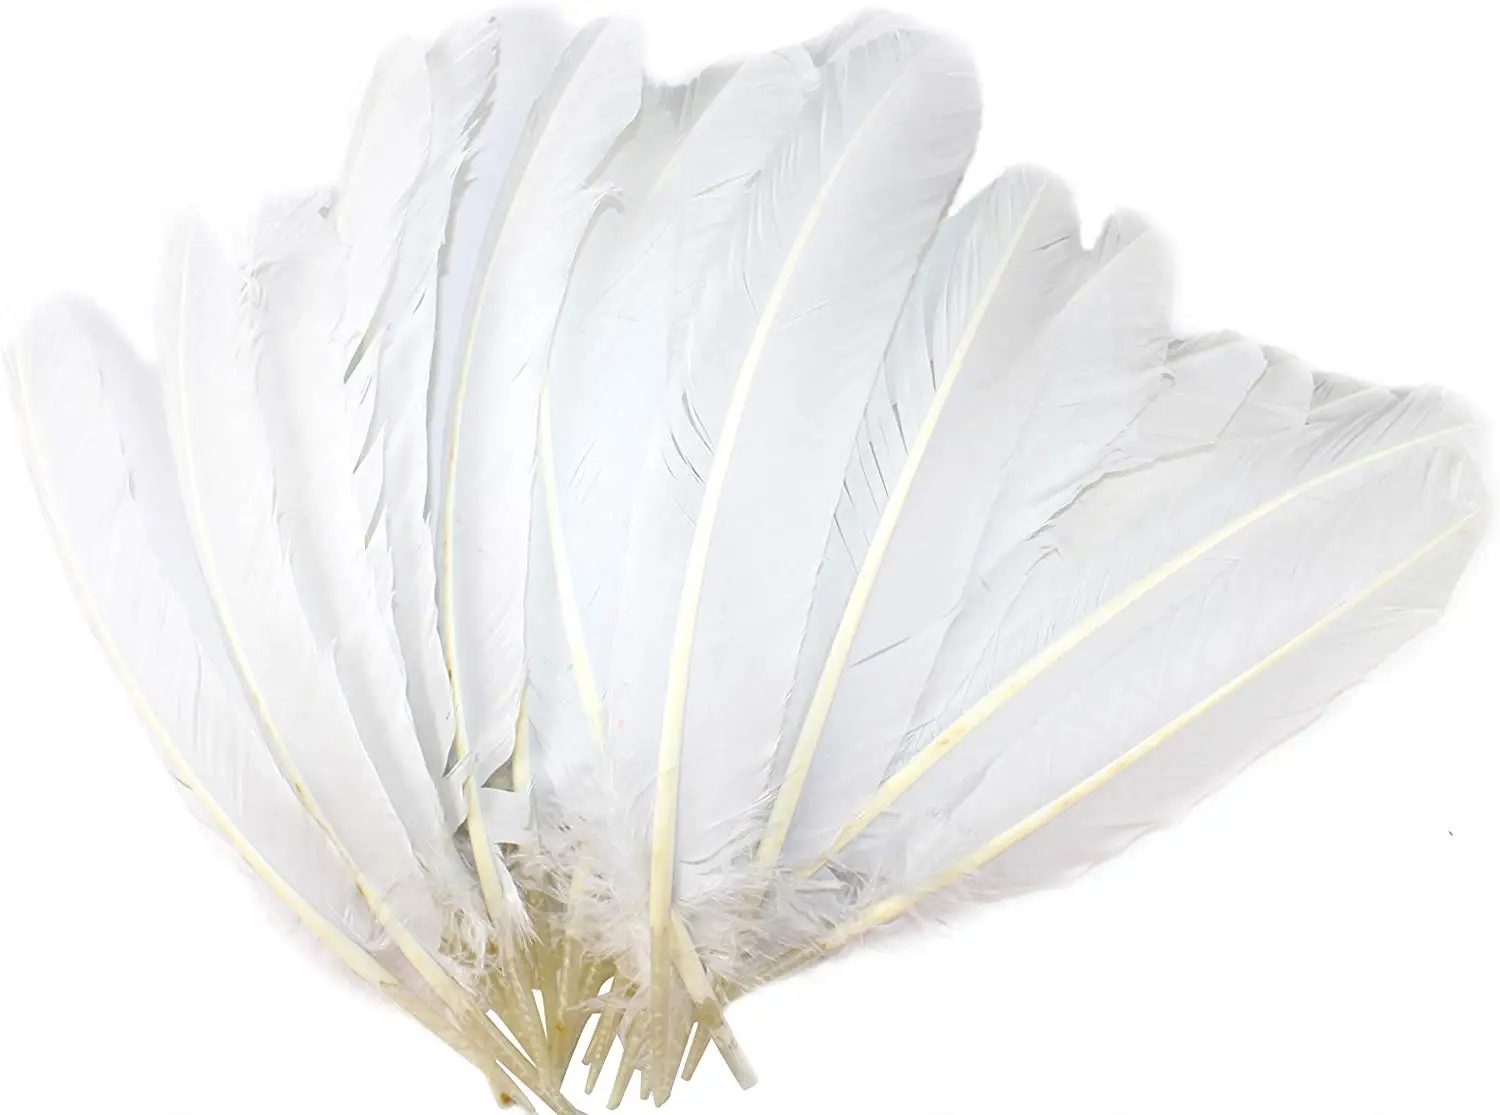 10 Pcs white color Turkey quill feathers 